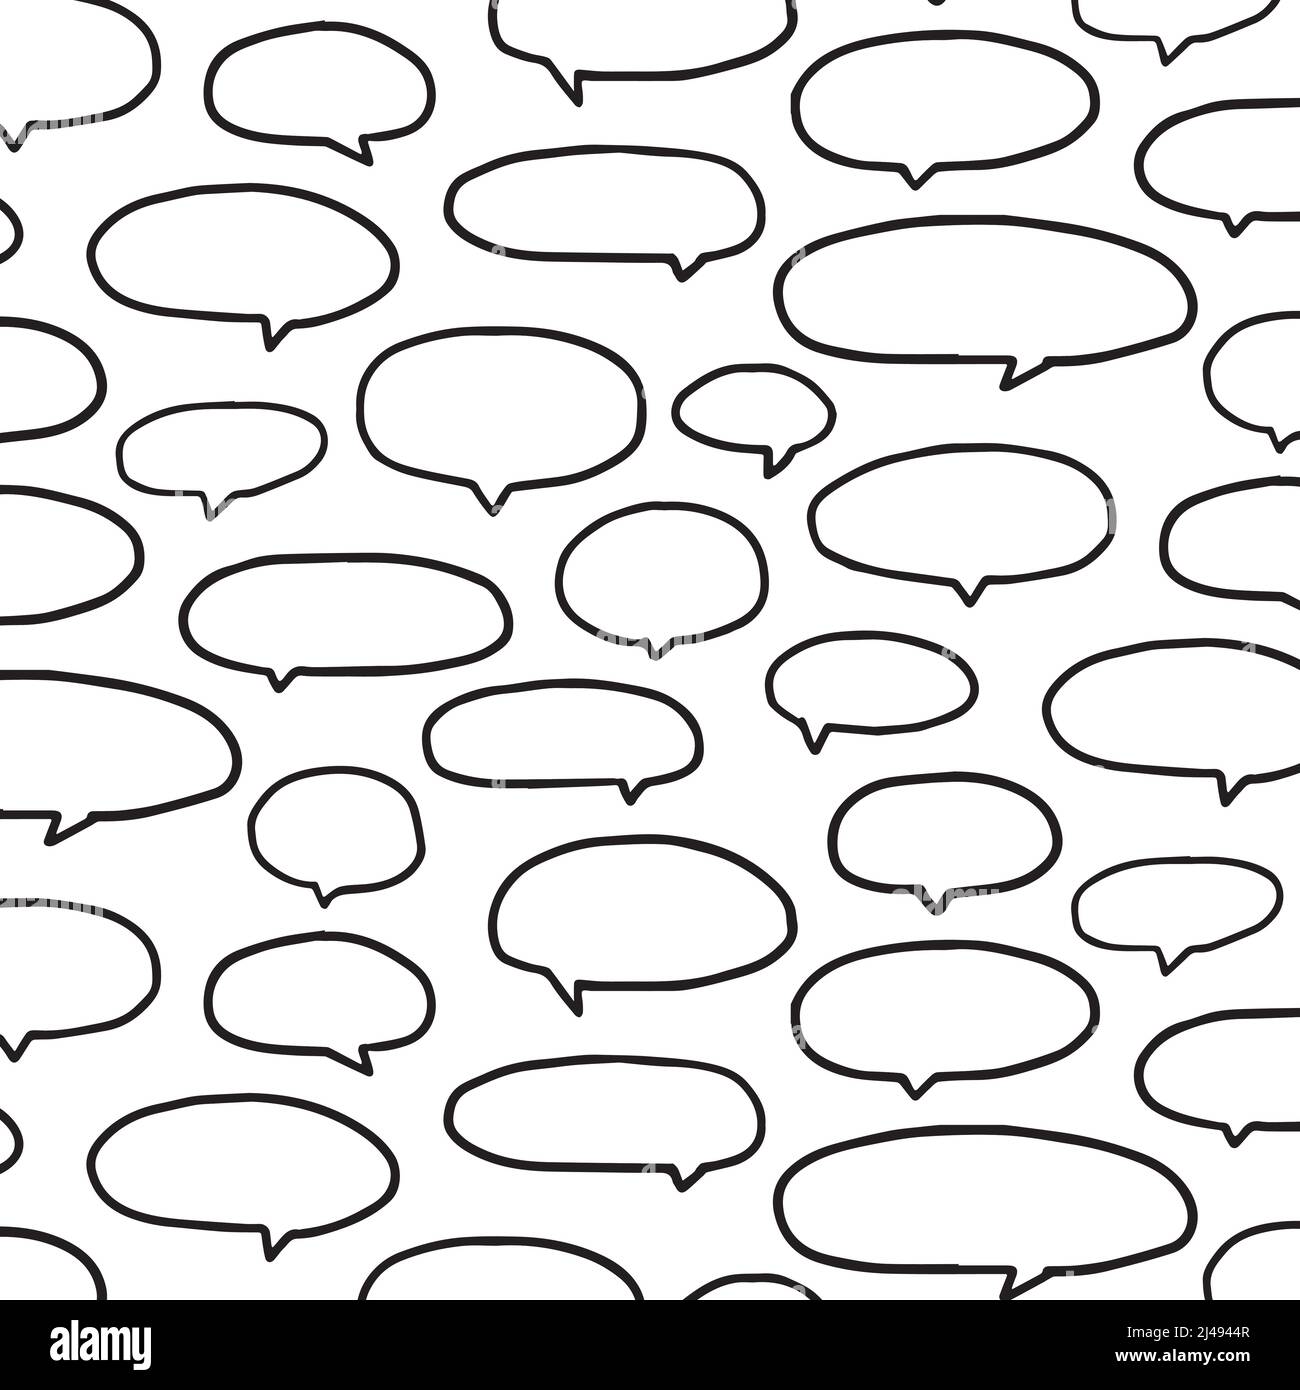 Hand drawn vector illustration of speech bubbles pattern on white background. Empty word bubble Stock Vector